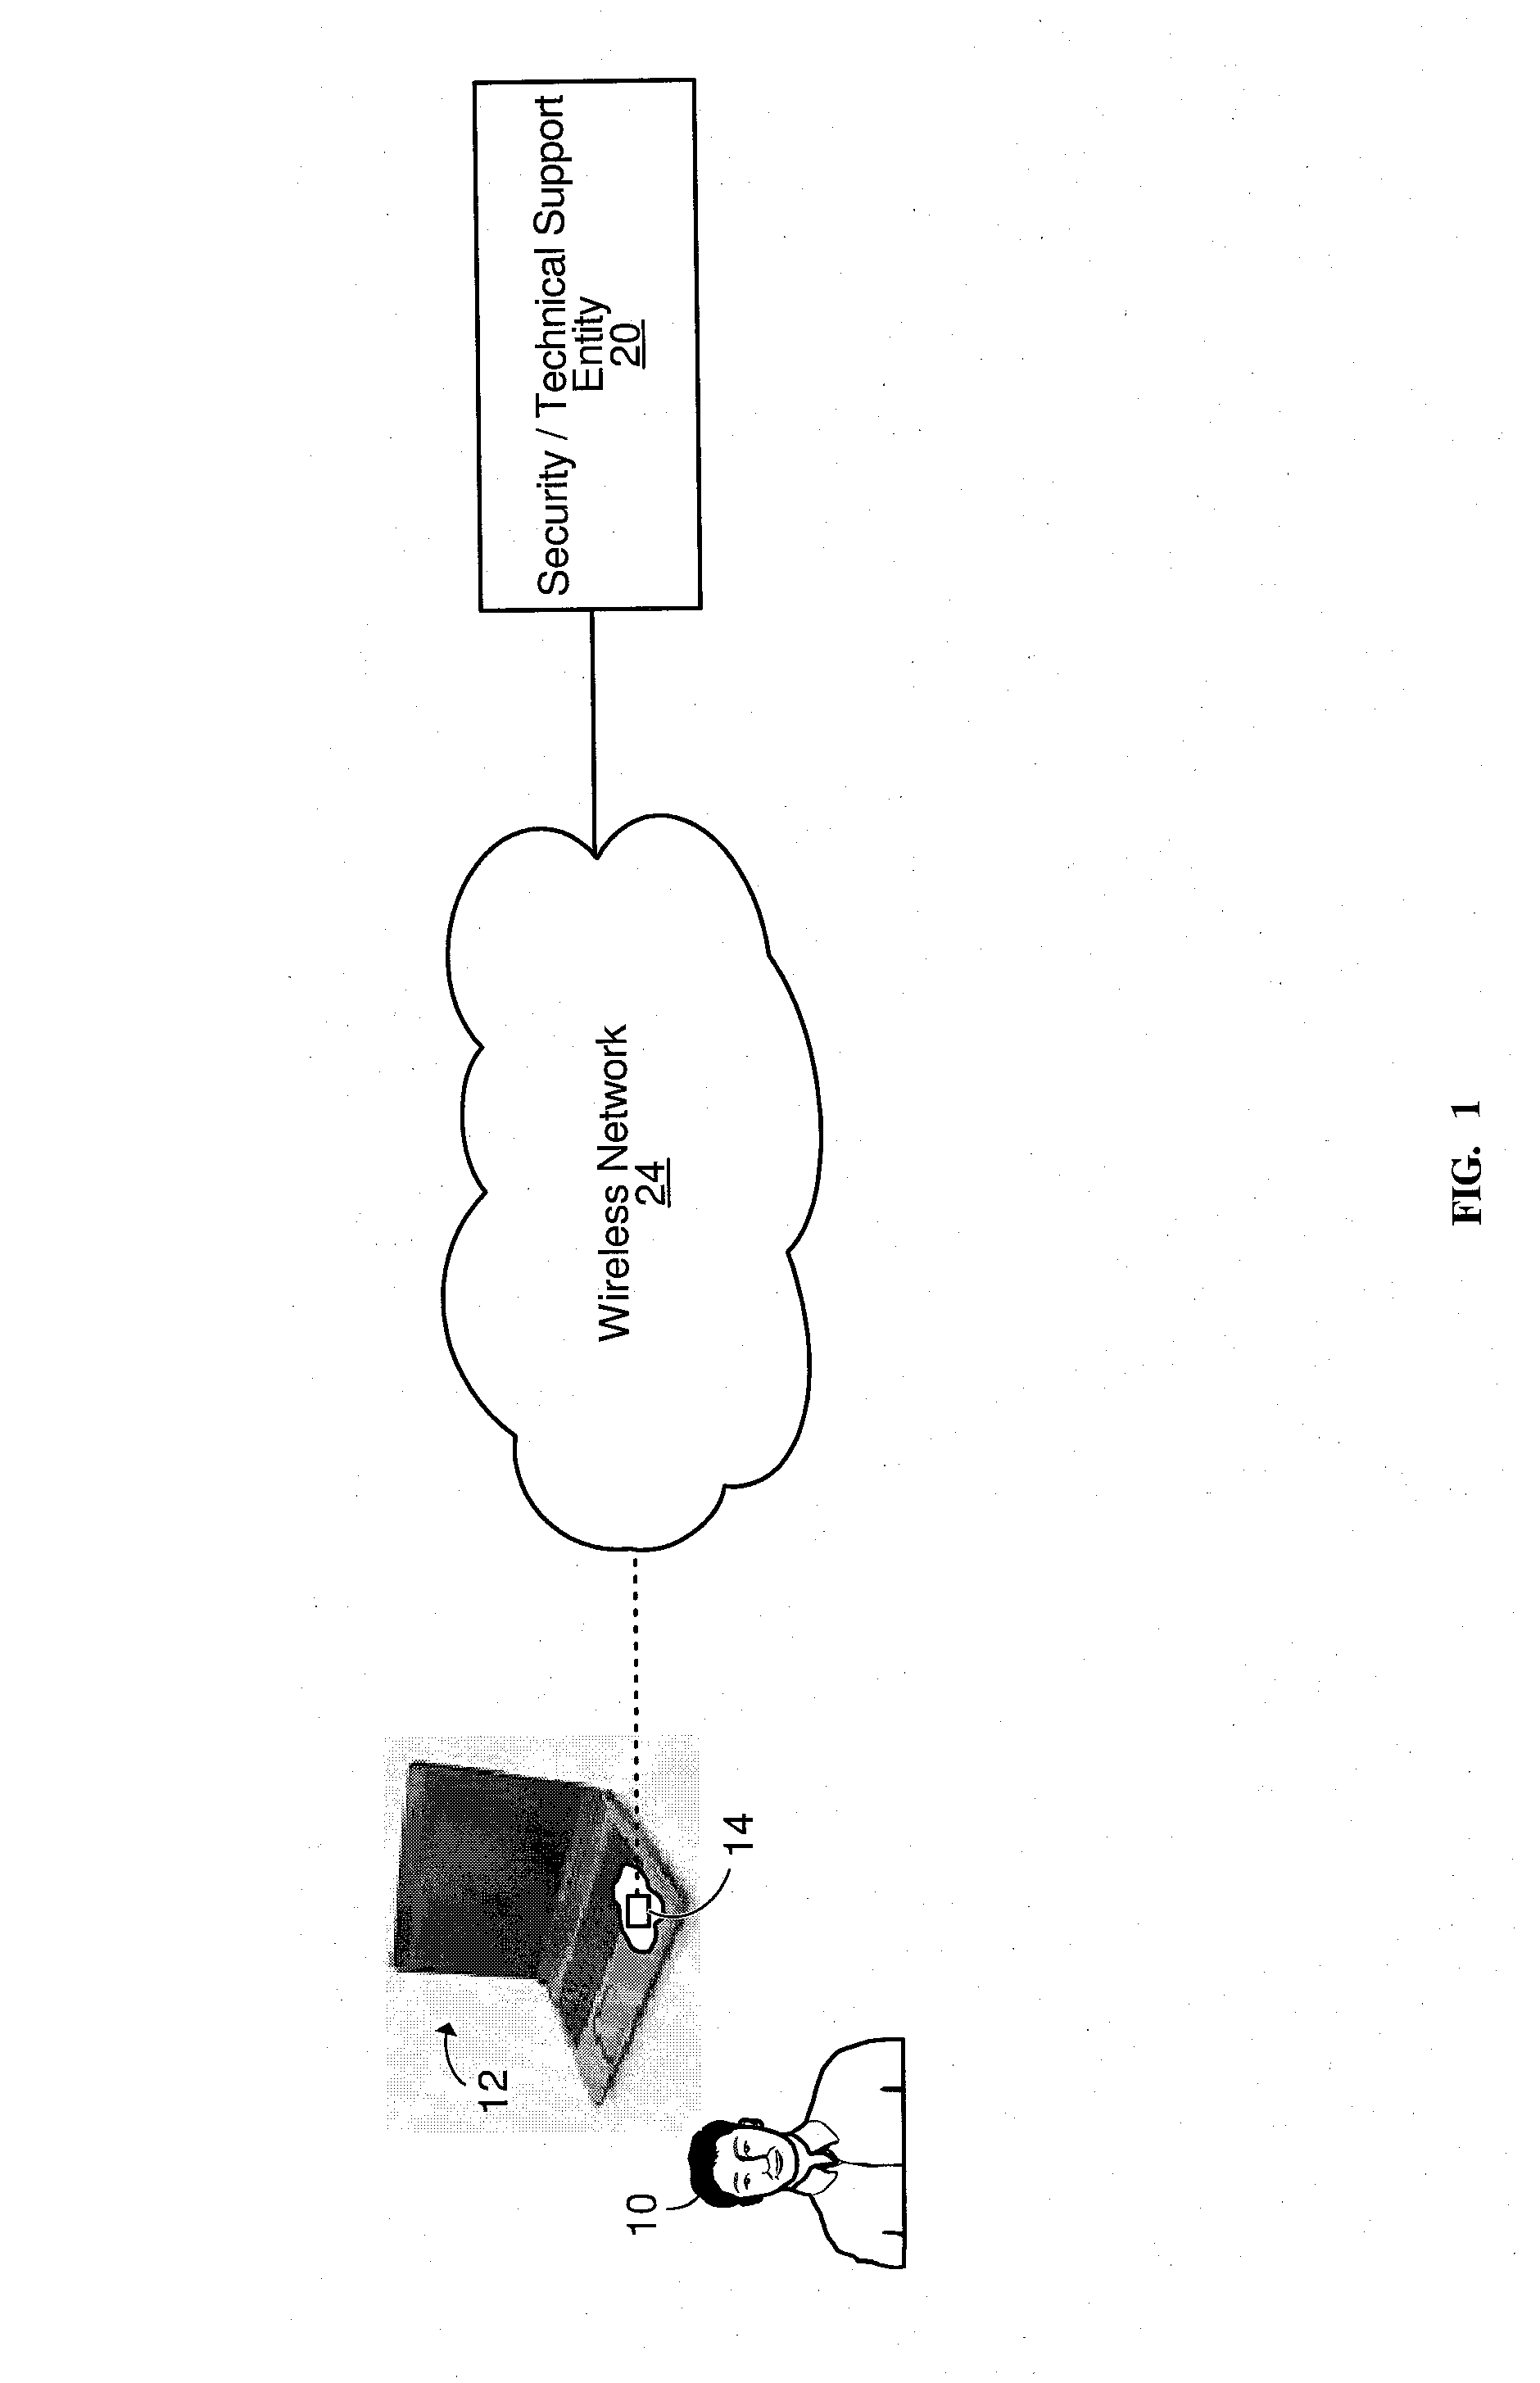 Methods and systems for providing a wireless security service and/or a wireless technical support service for personal computers